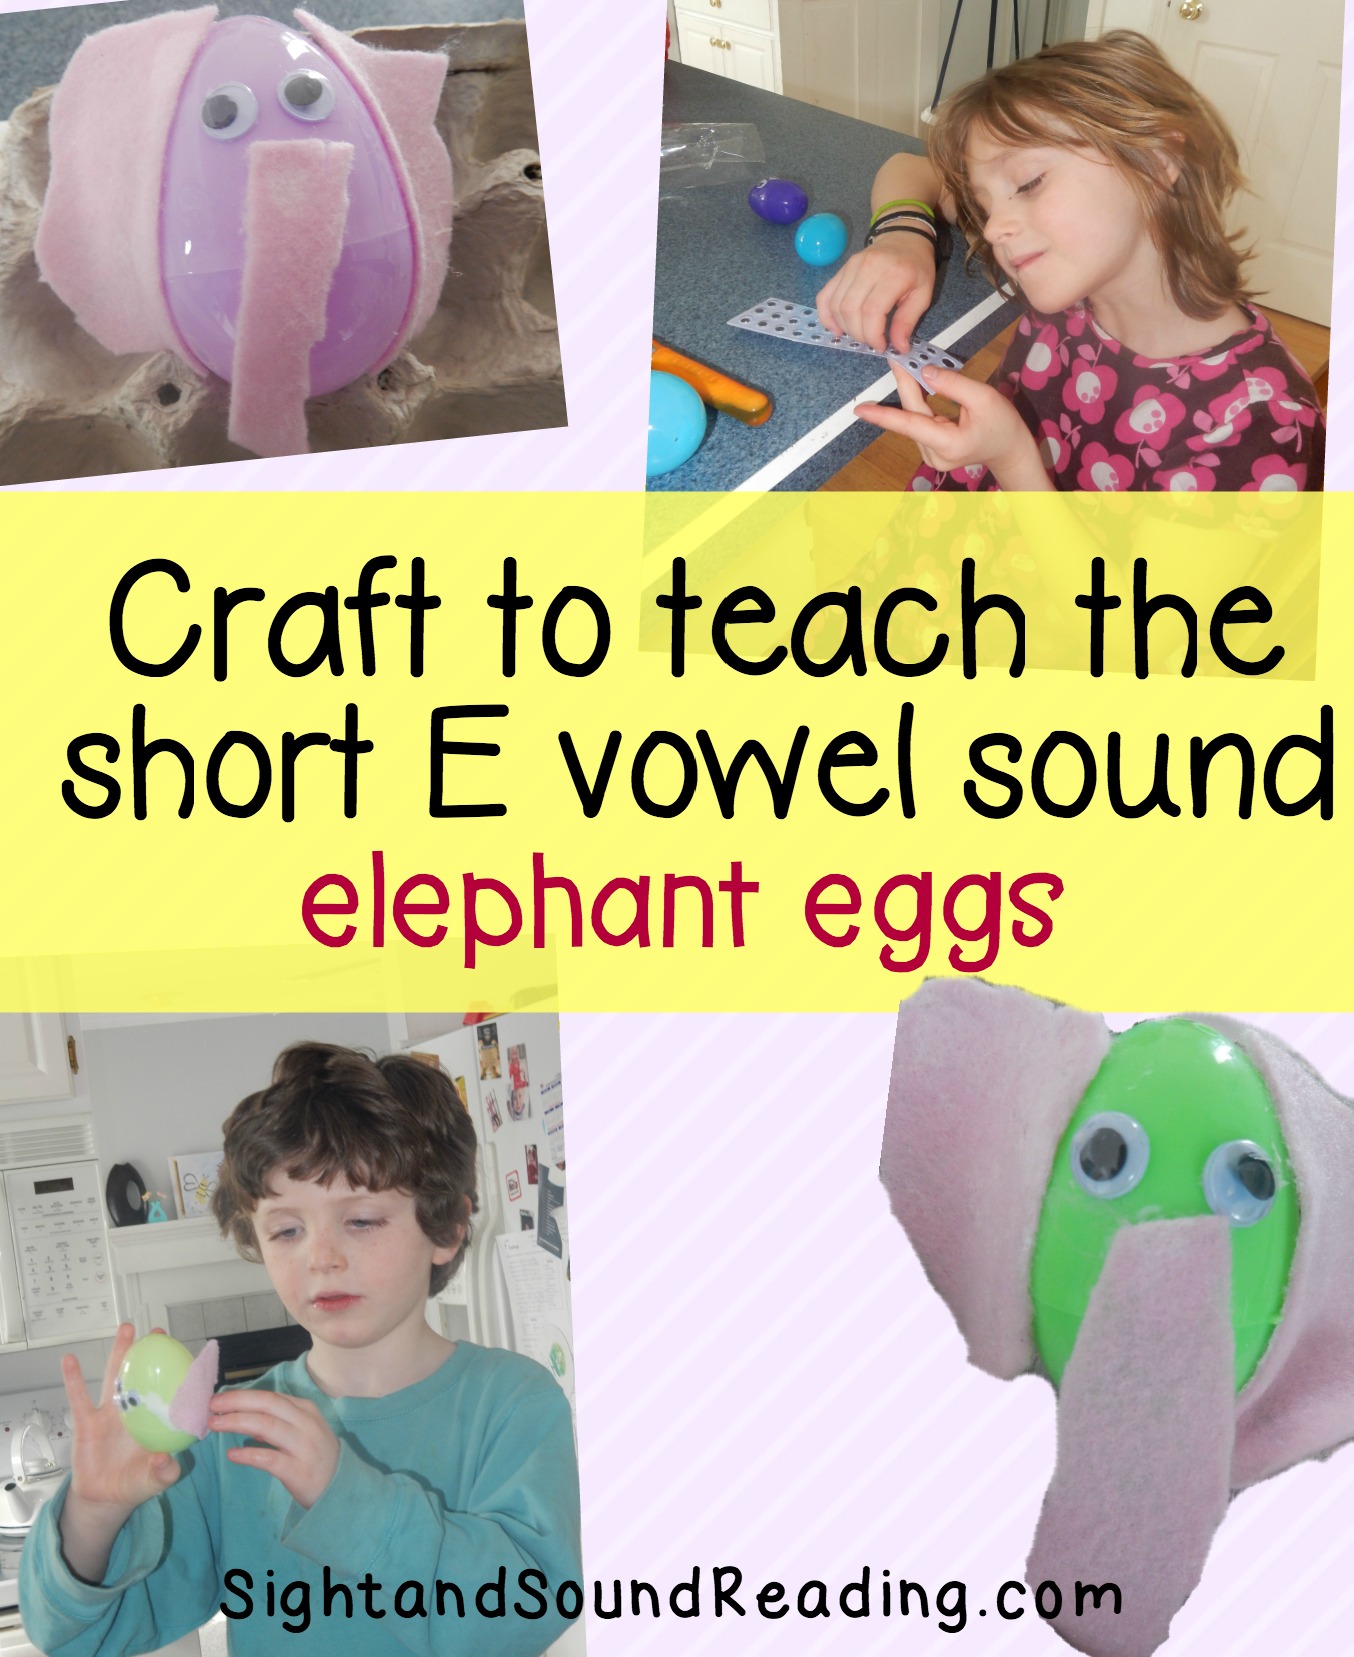 phonics-vowel-sounds-mrs-karles-sight-and-sound-reading